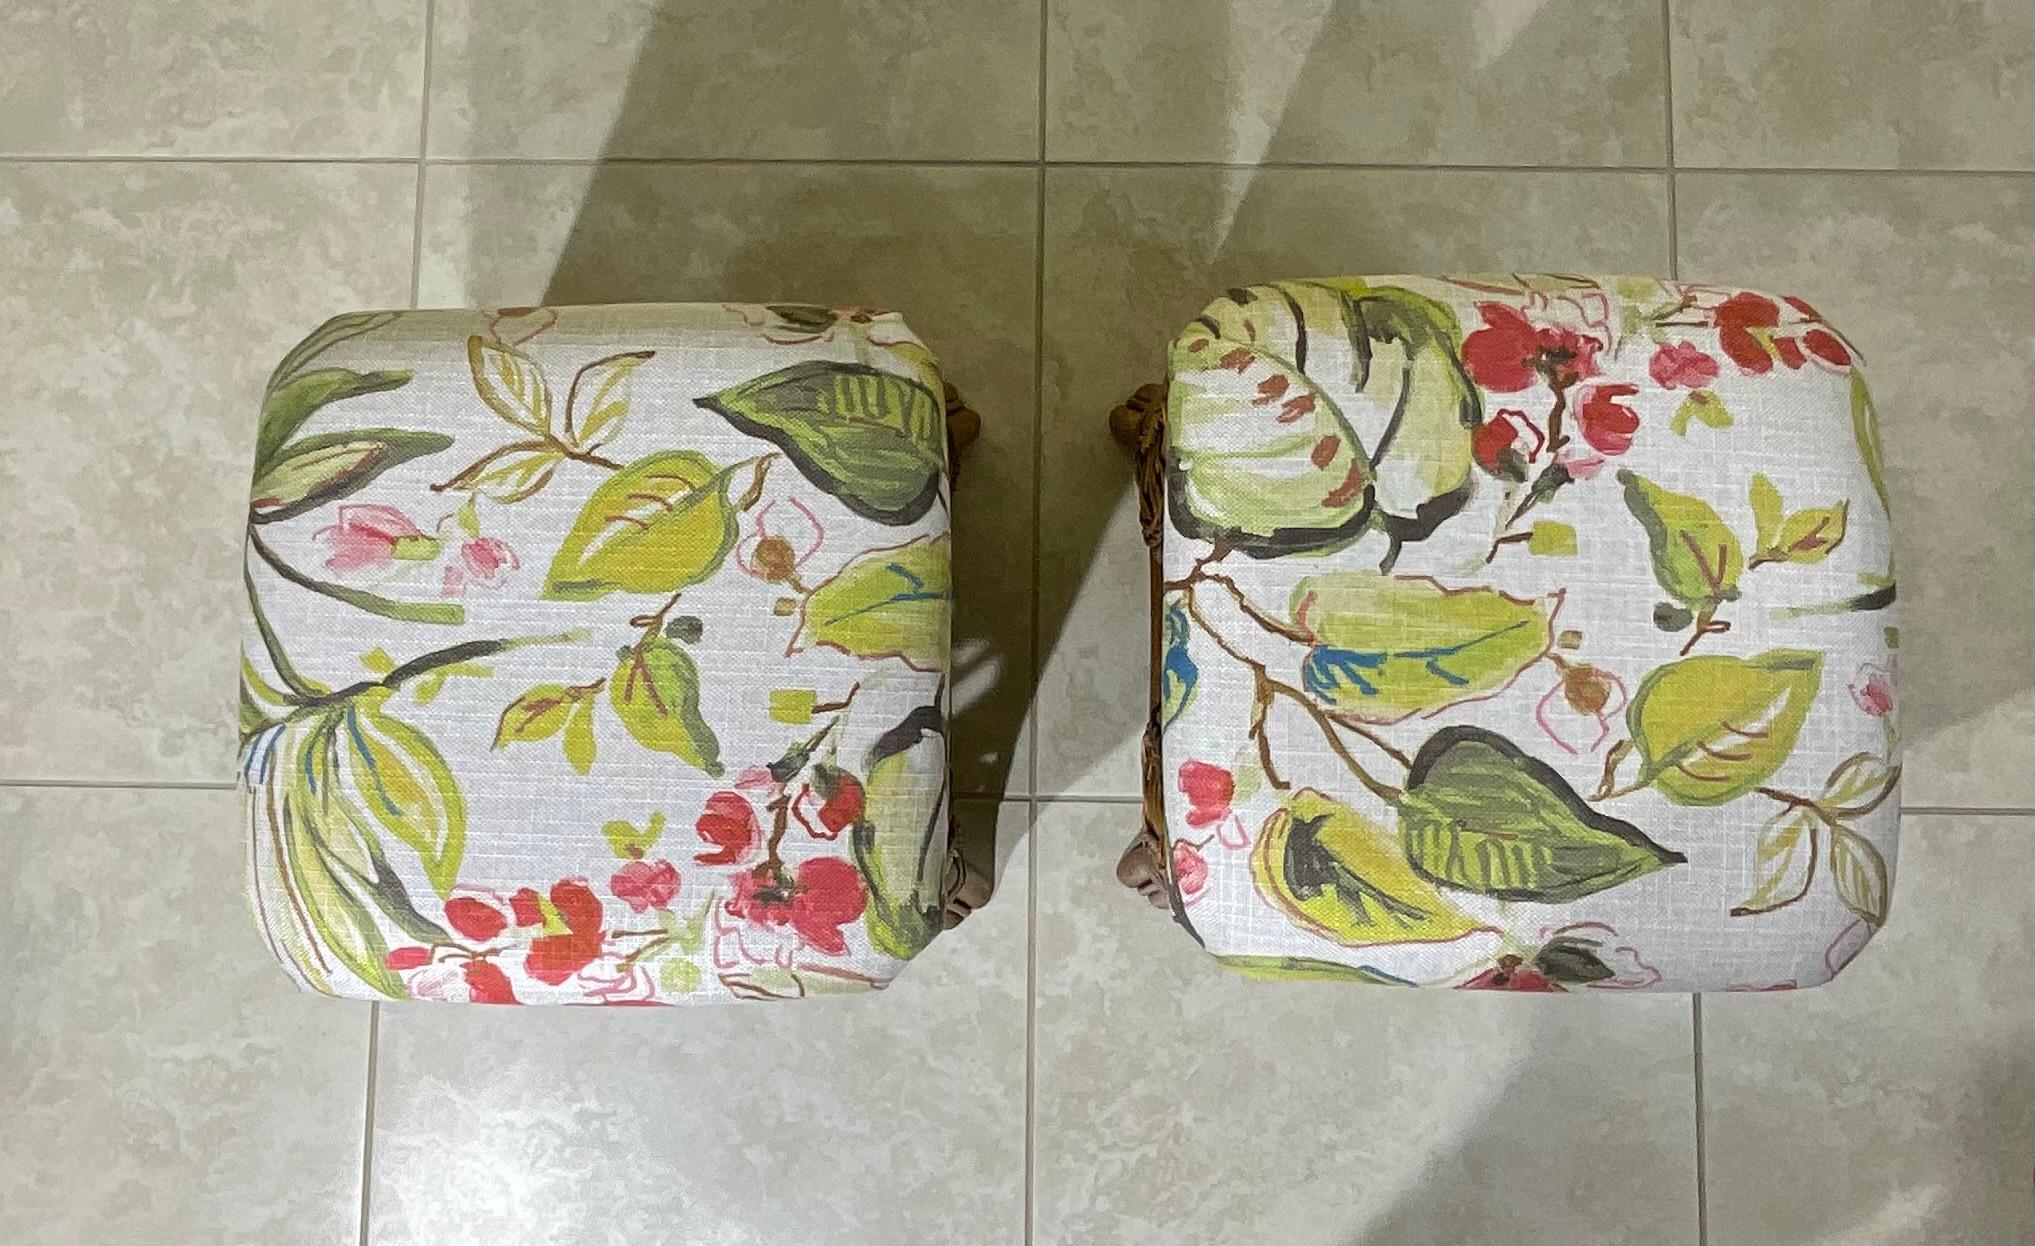 Decorative pair of vintage bamboo and rattan stools or benches ,newly upholstered with fine floral print fabric .
Great addition to any room.